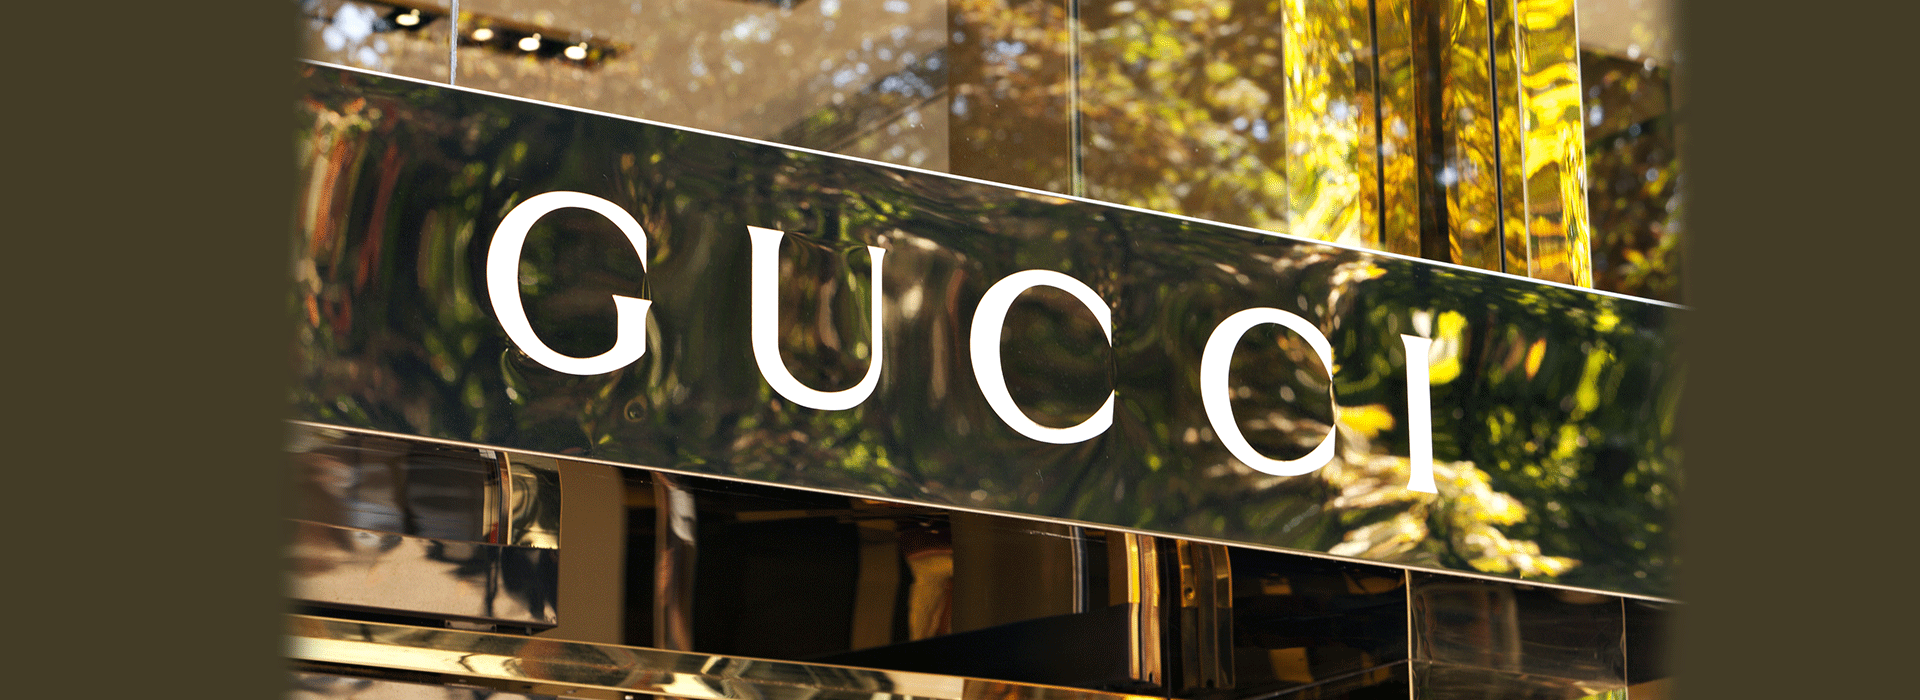 golden Gucci sign on a storefront 